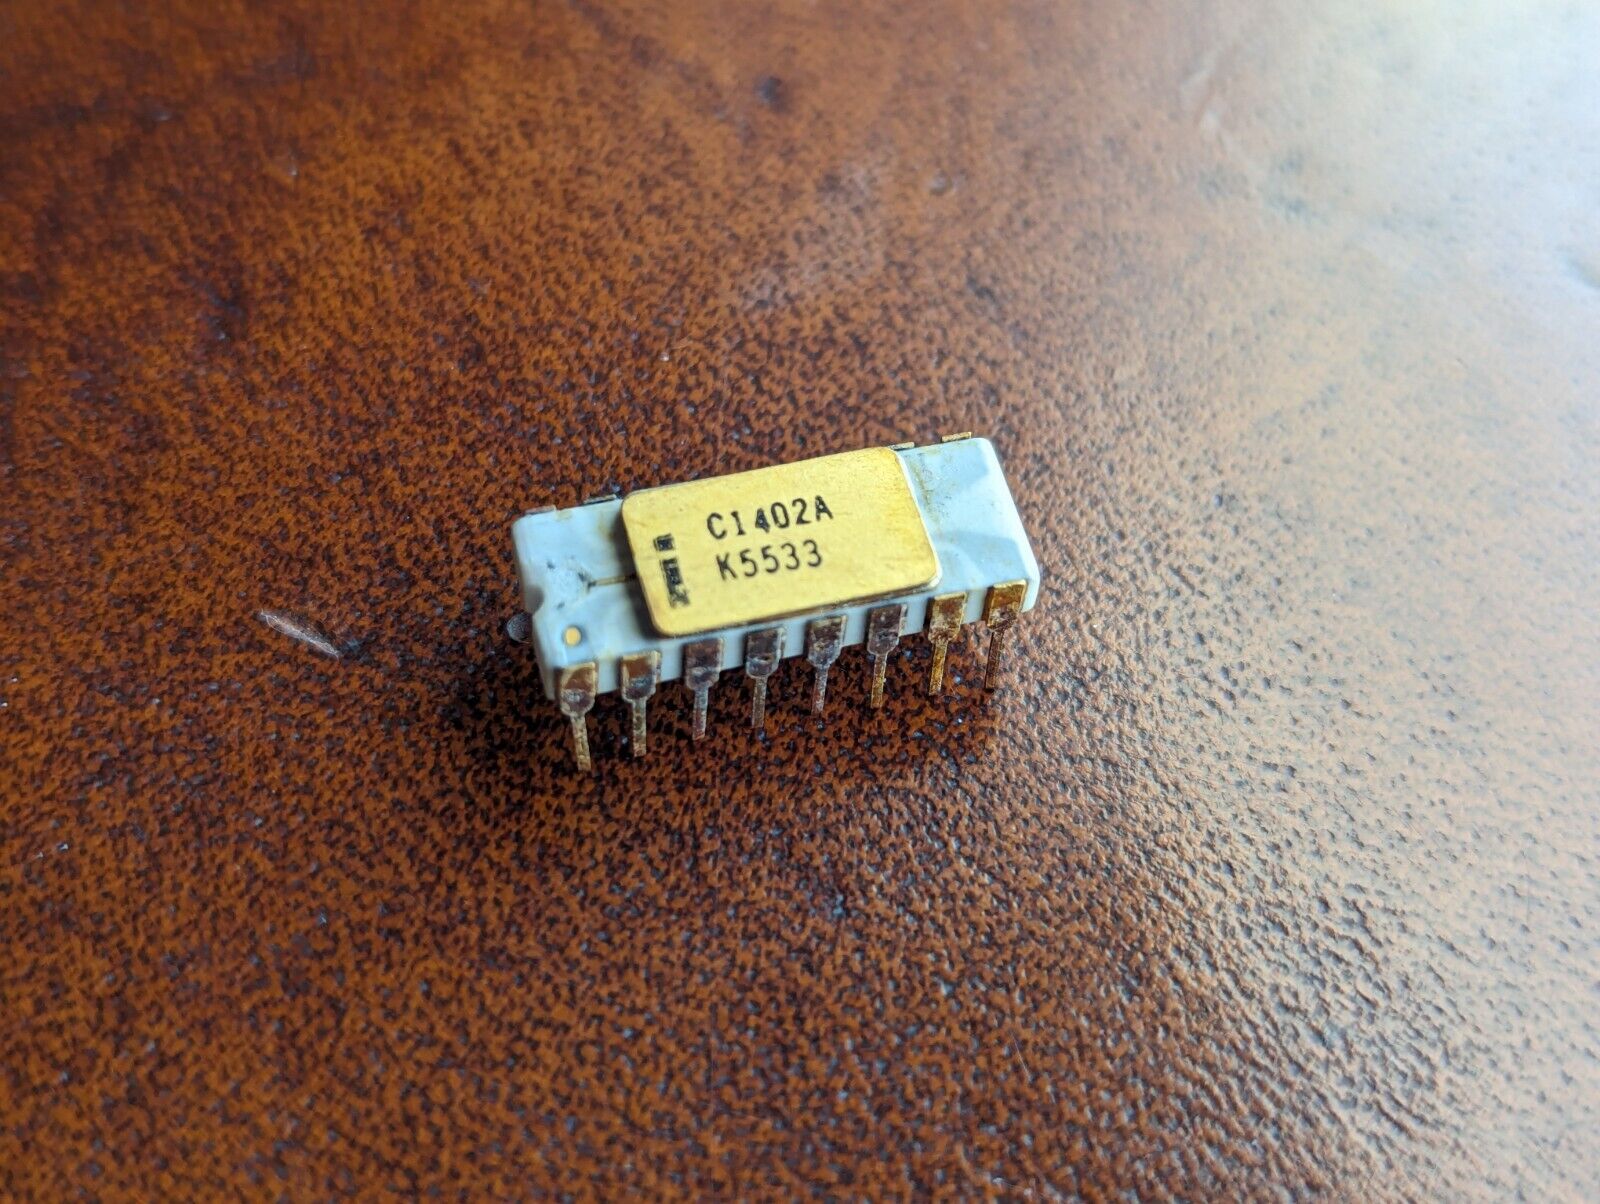 Vintage Intel Grey C1402A Shift-Register - C4004 era Chip made in Malaysia